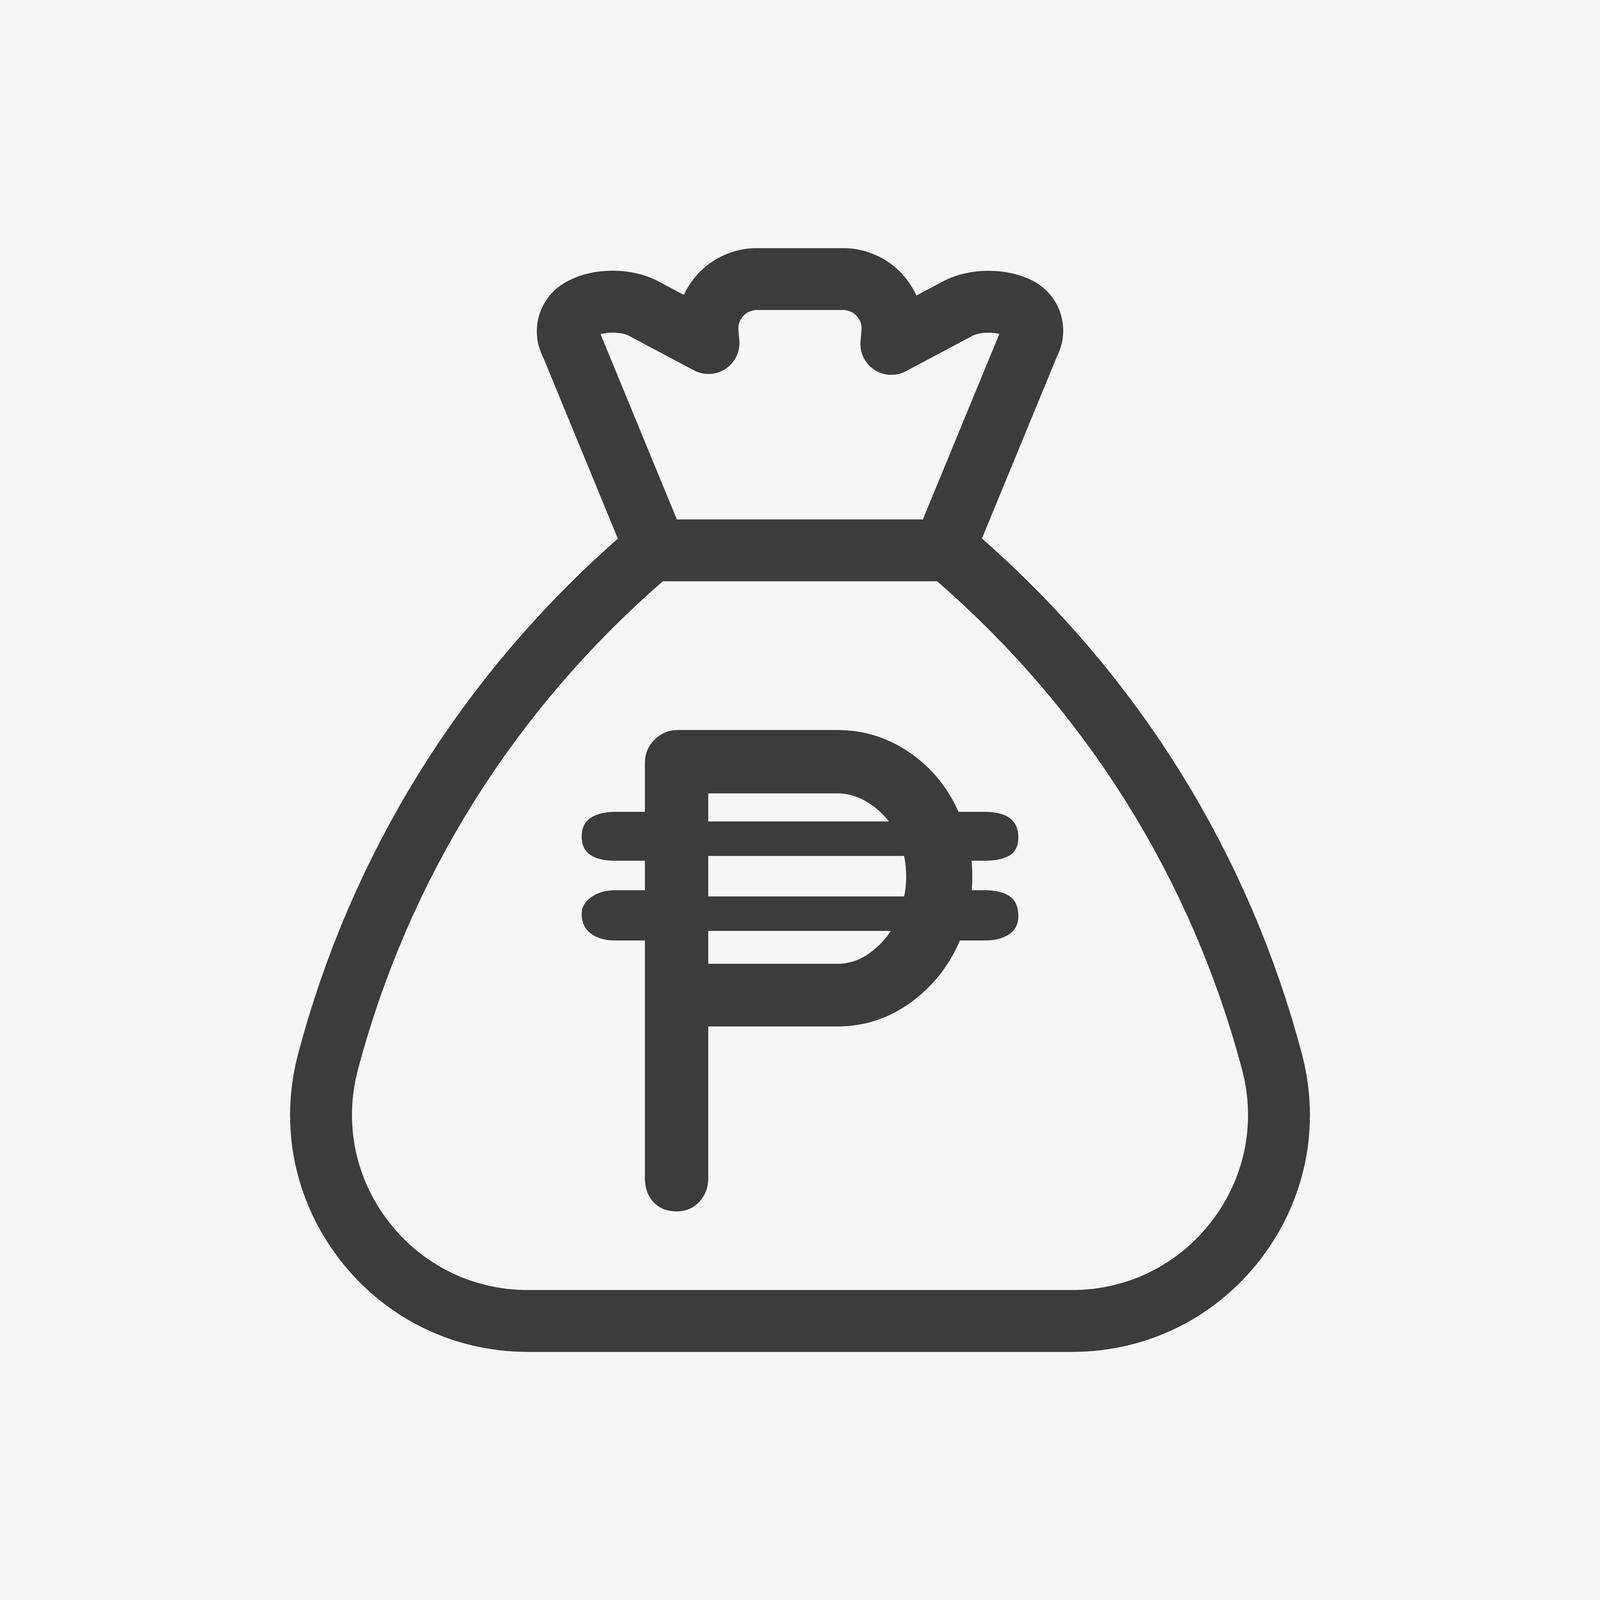 Philippine peso icon. Sack with cash isolated on white background. Money bag outline icon vector pictogram. Philippine currency symbol.